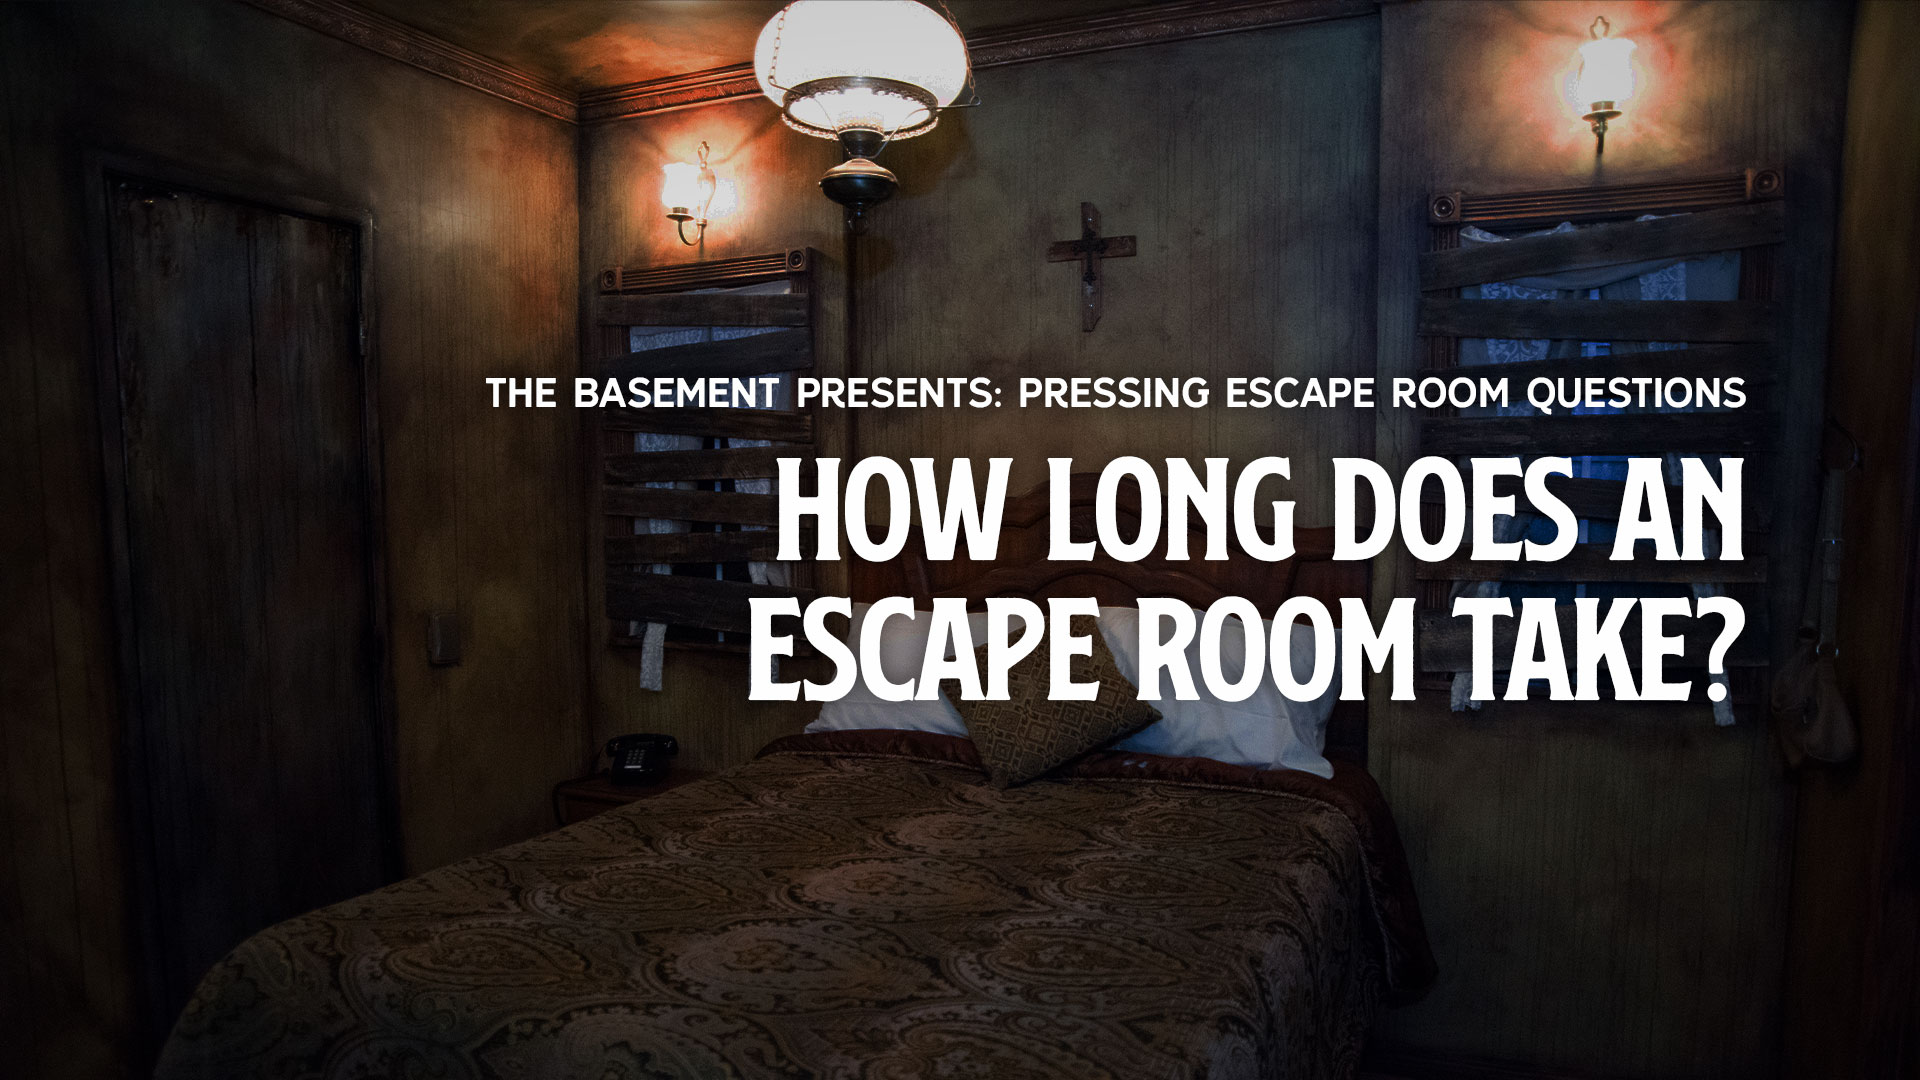 How long does an escape room take?